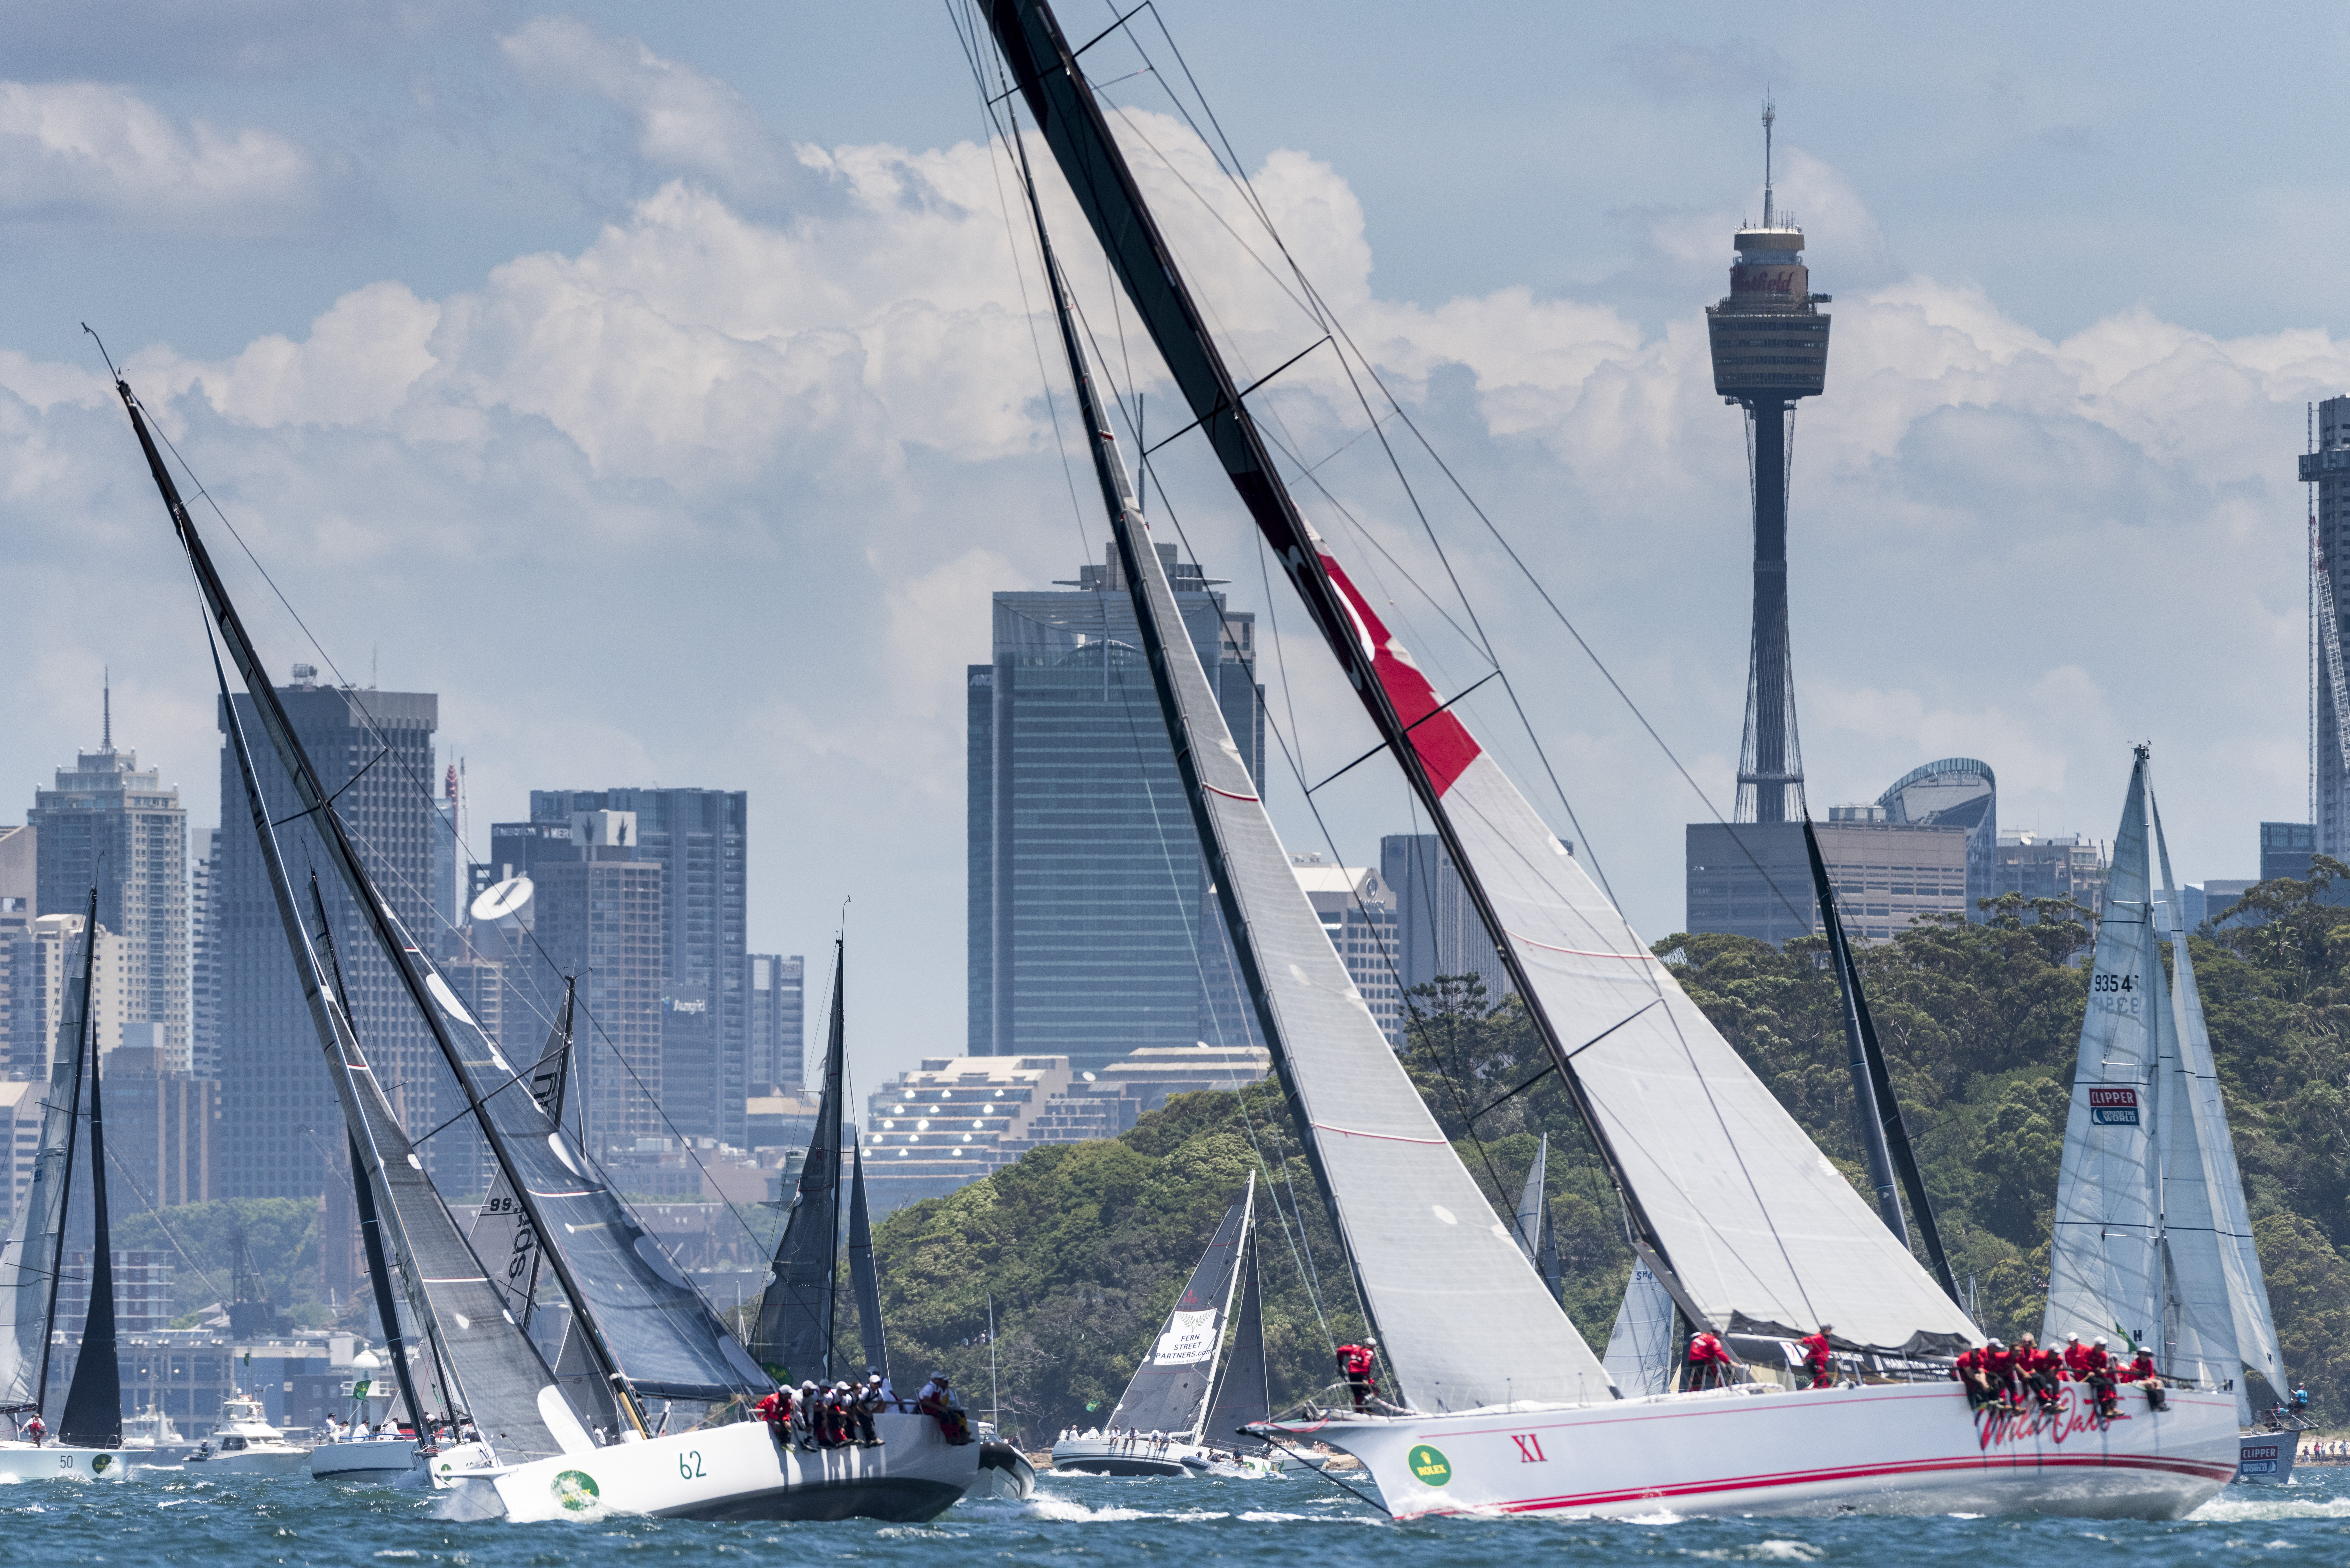 Two former race winners - WILD OATS XI and VICTOIRE - jostle for space during the 2016 Rolex Sydney Hobart race start